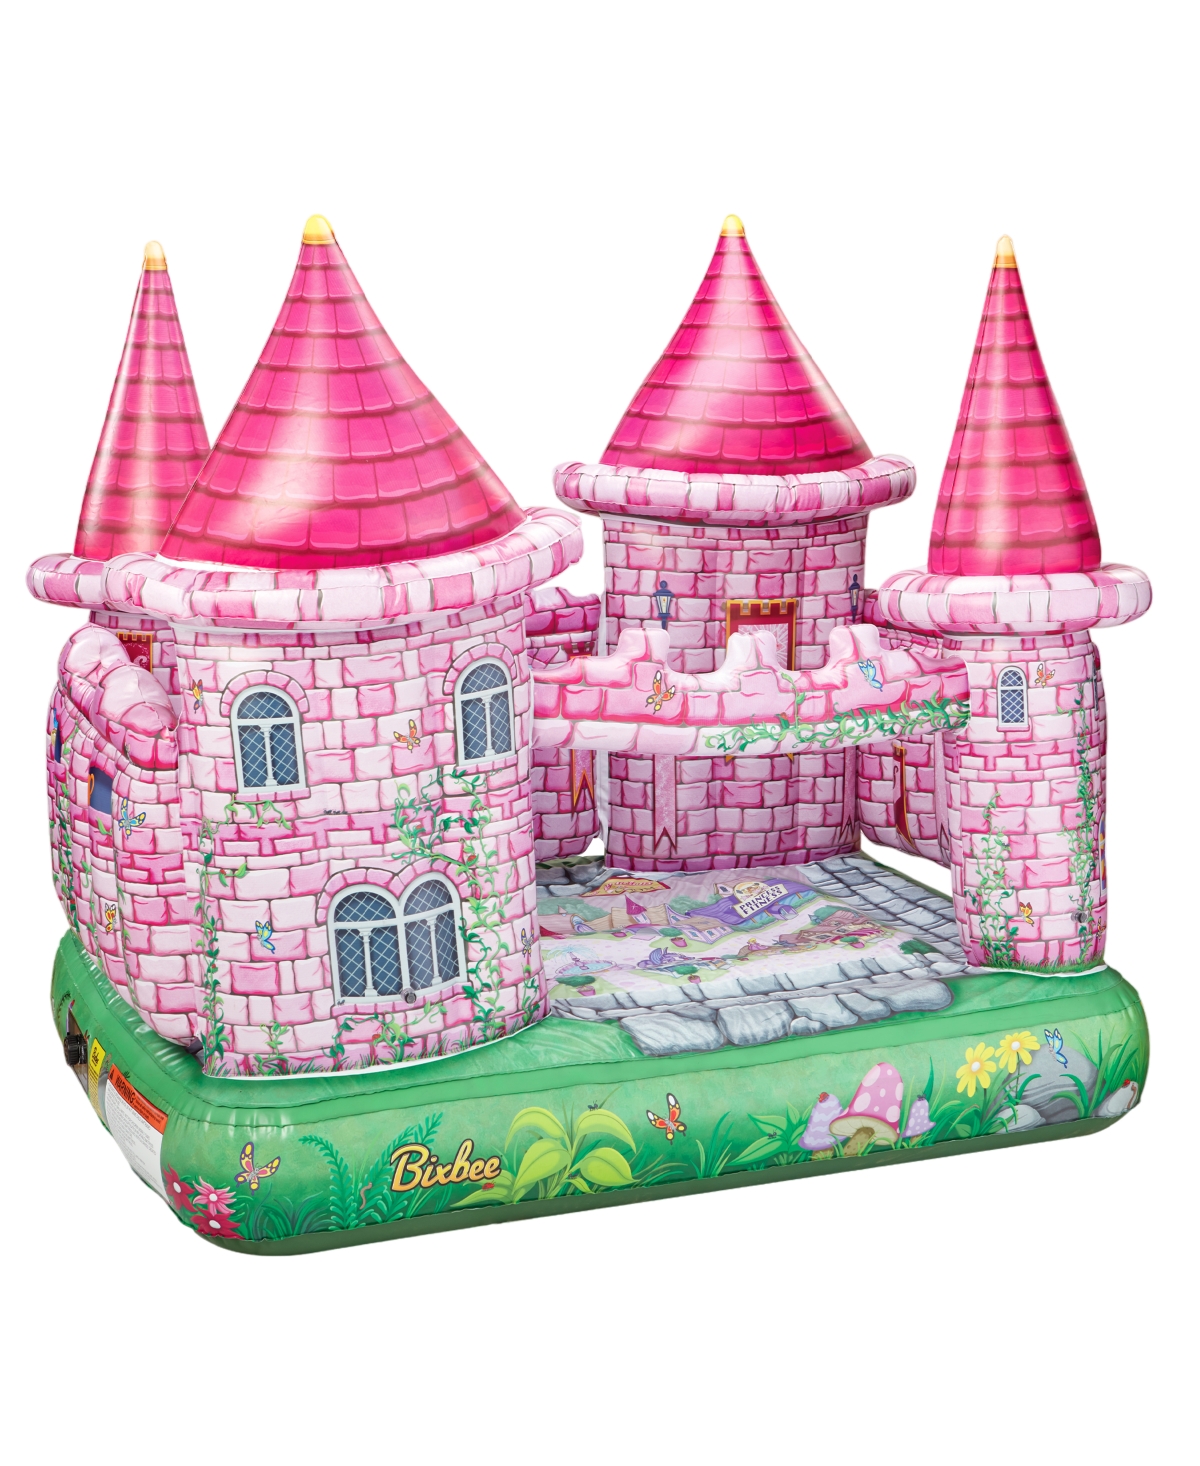 Bixbee Sparklicious Castle Inflatable Playset In Pink